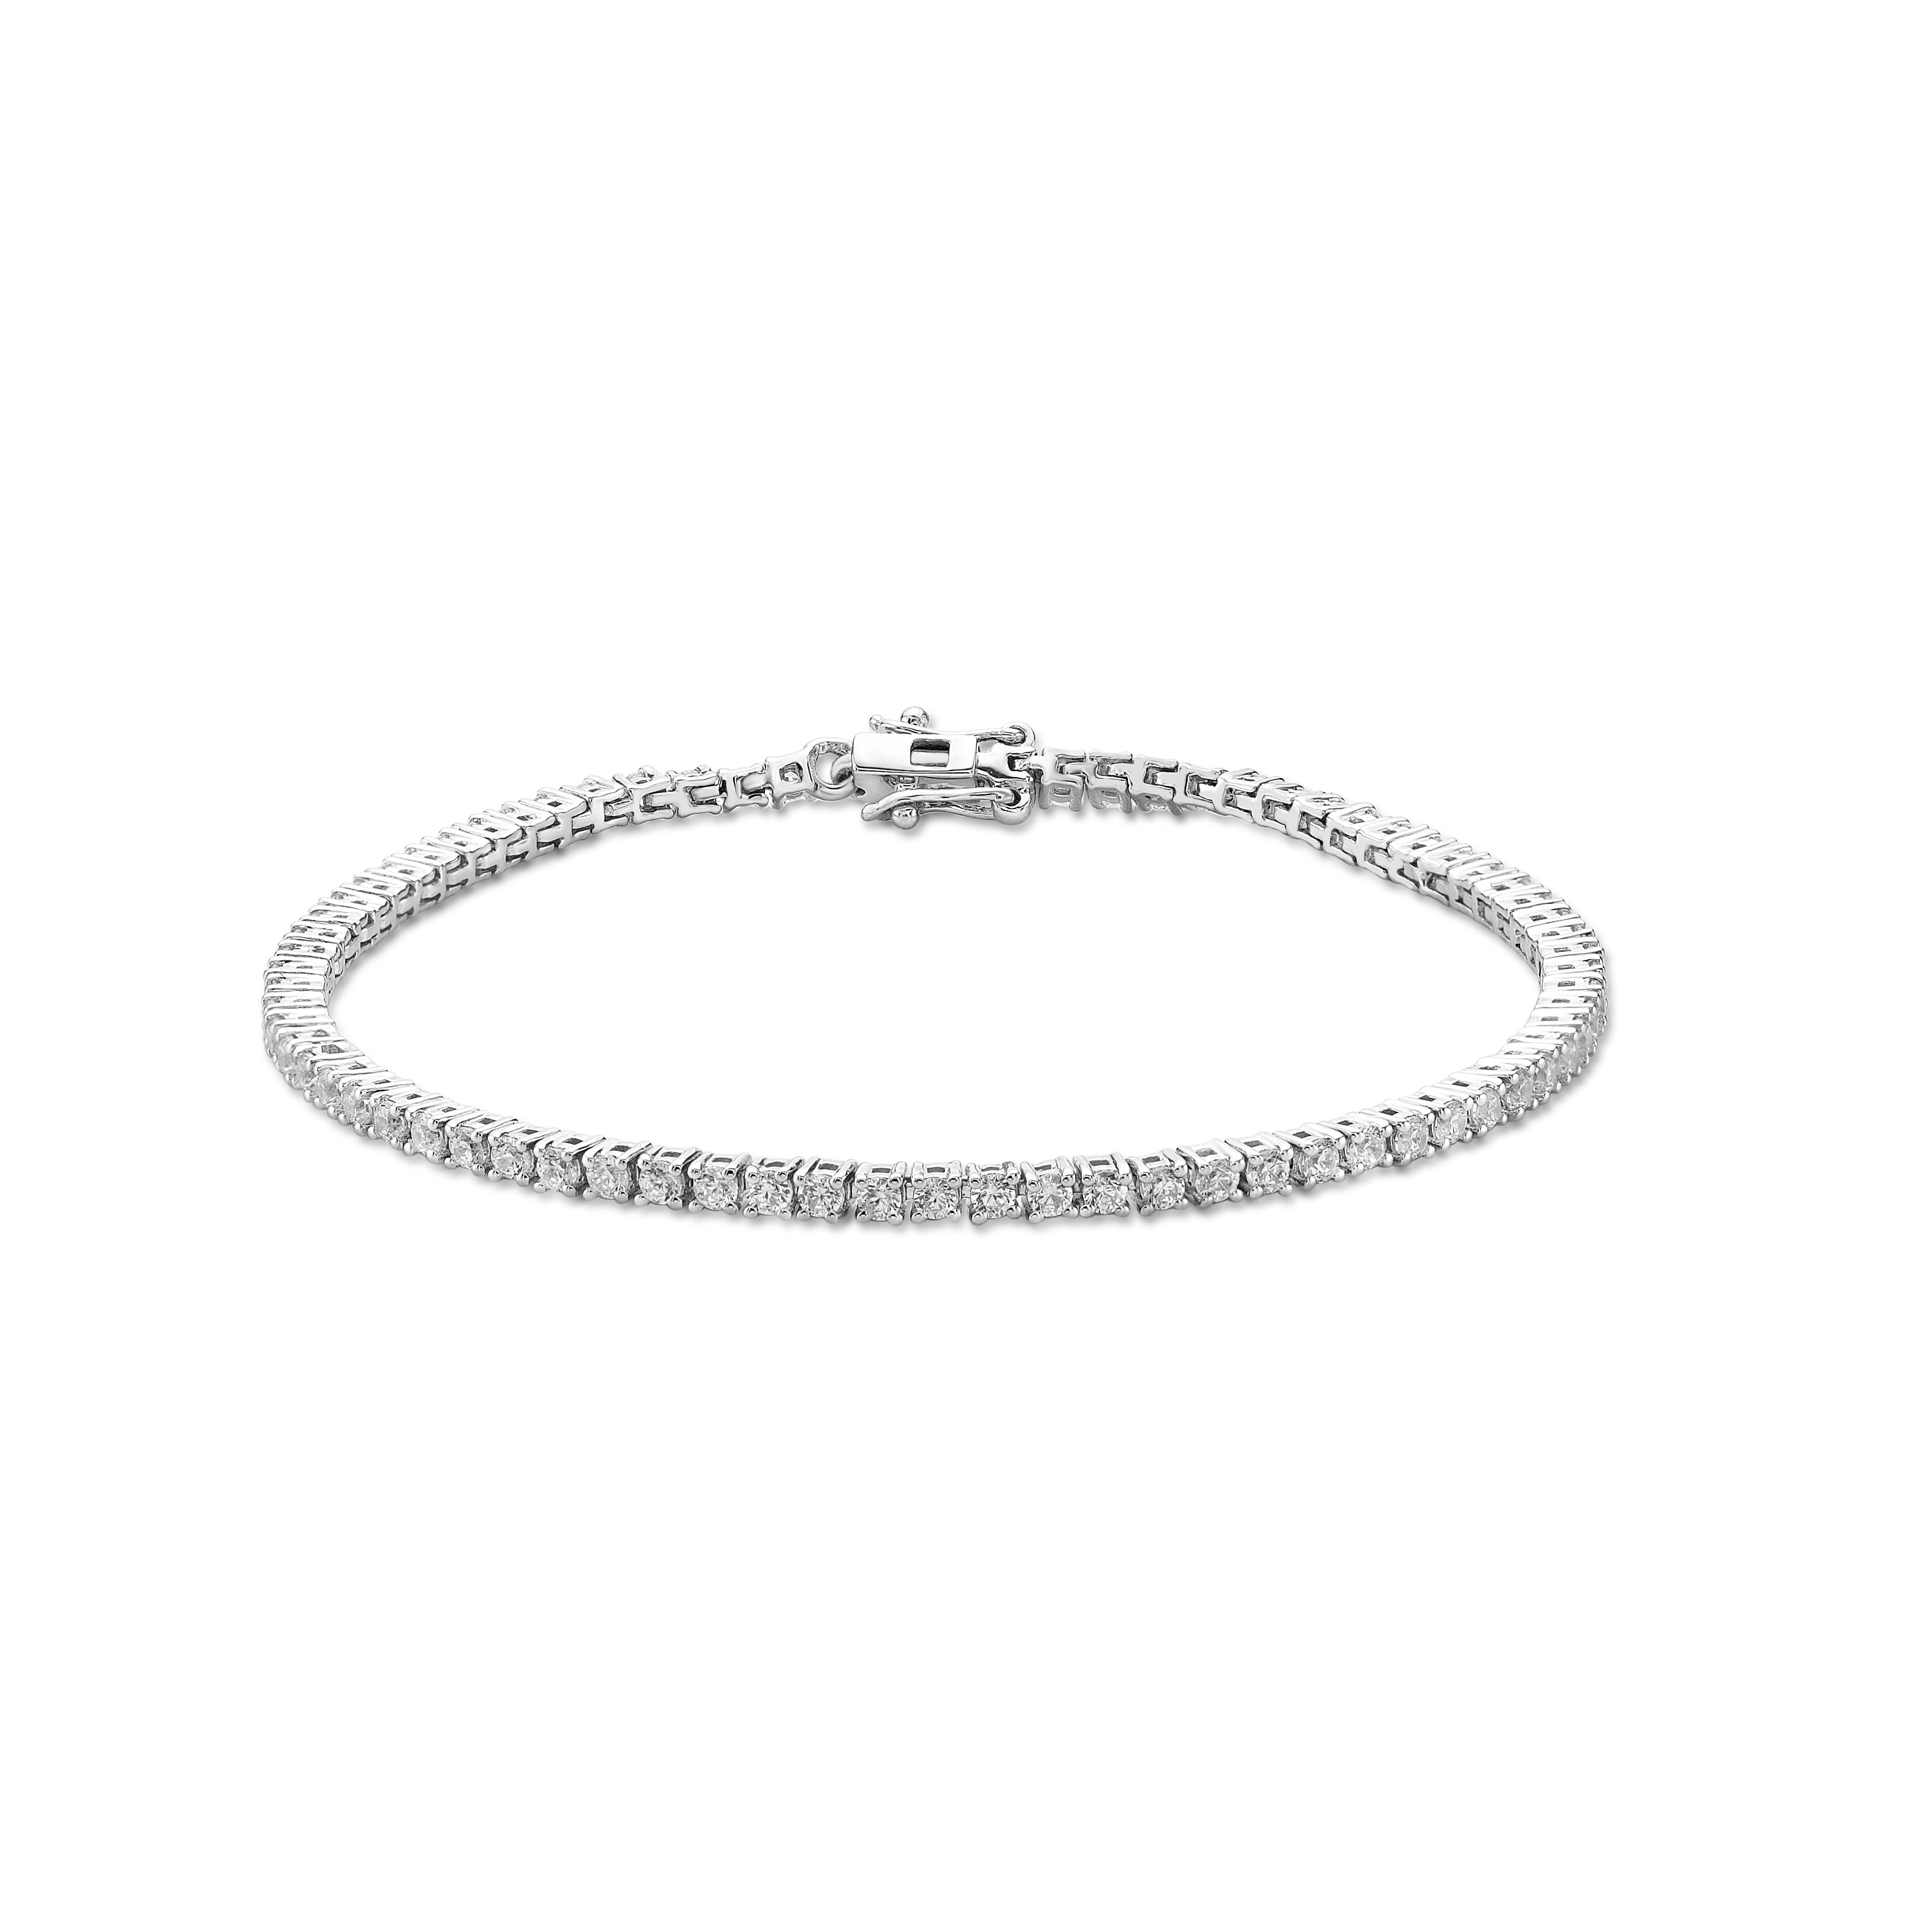 Leslies 925 Sterling Silver Textured Three Strand Anklet w/1in ext; 9 inch